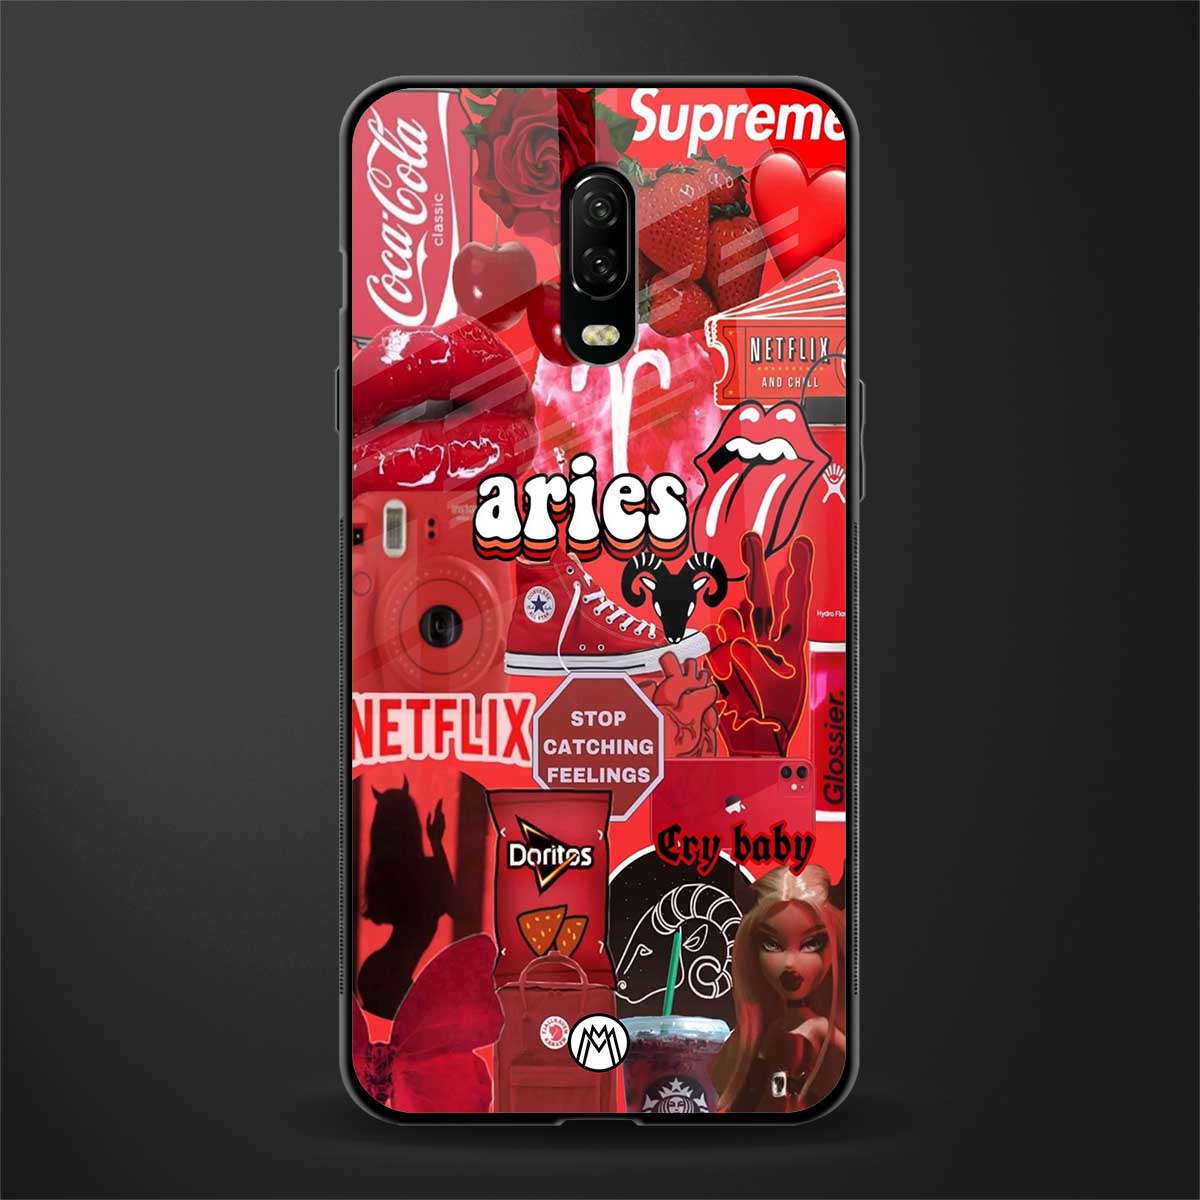 aries aesthetic collage glass case for oneplus 6t image